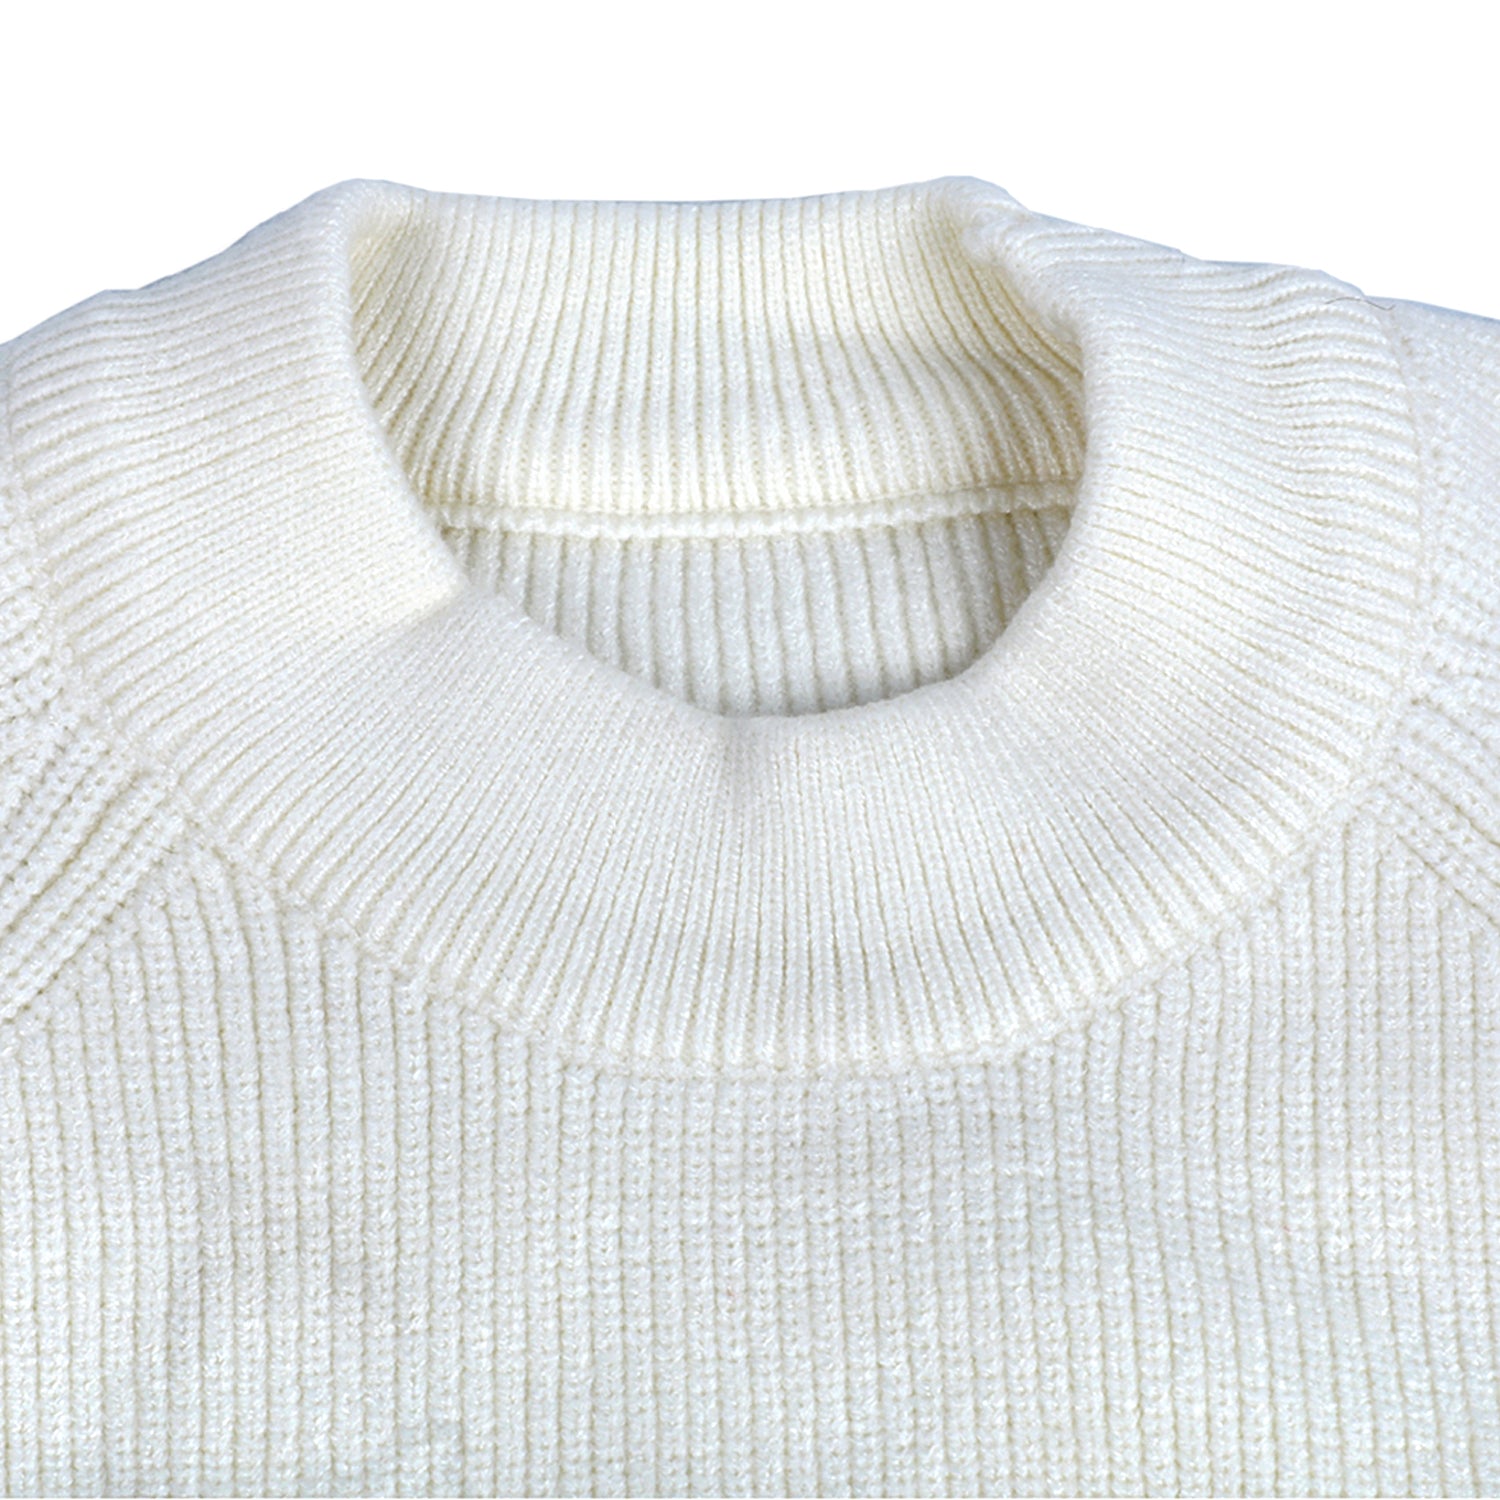 Ruffled Jumper Solid Premium Full Sleeves Braided Knit Sweater - White - Baby Moo